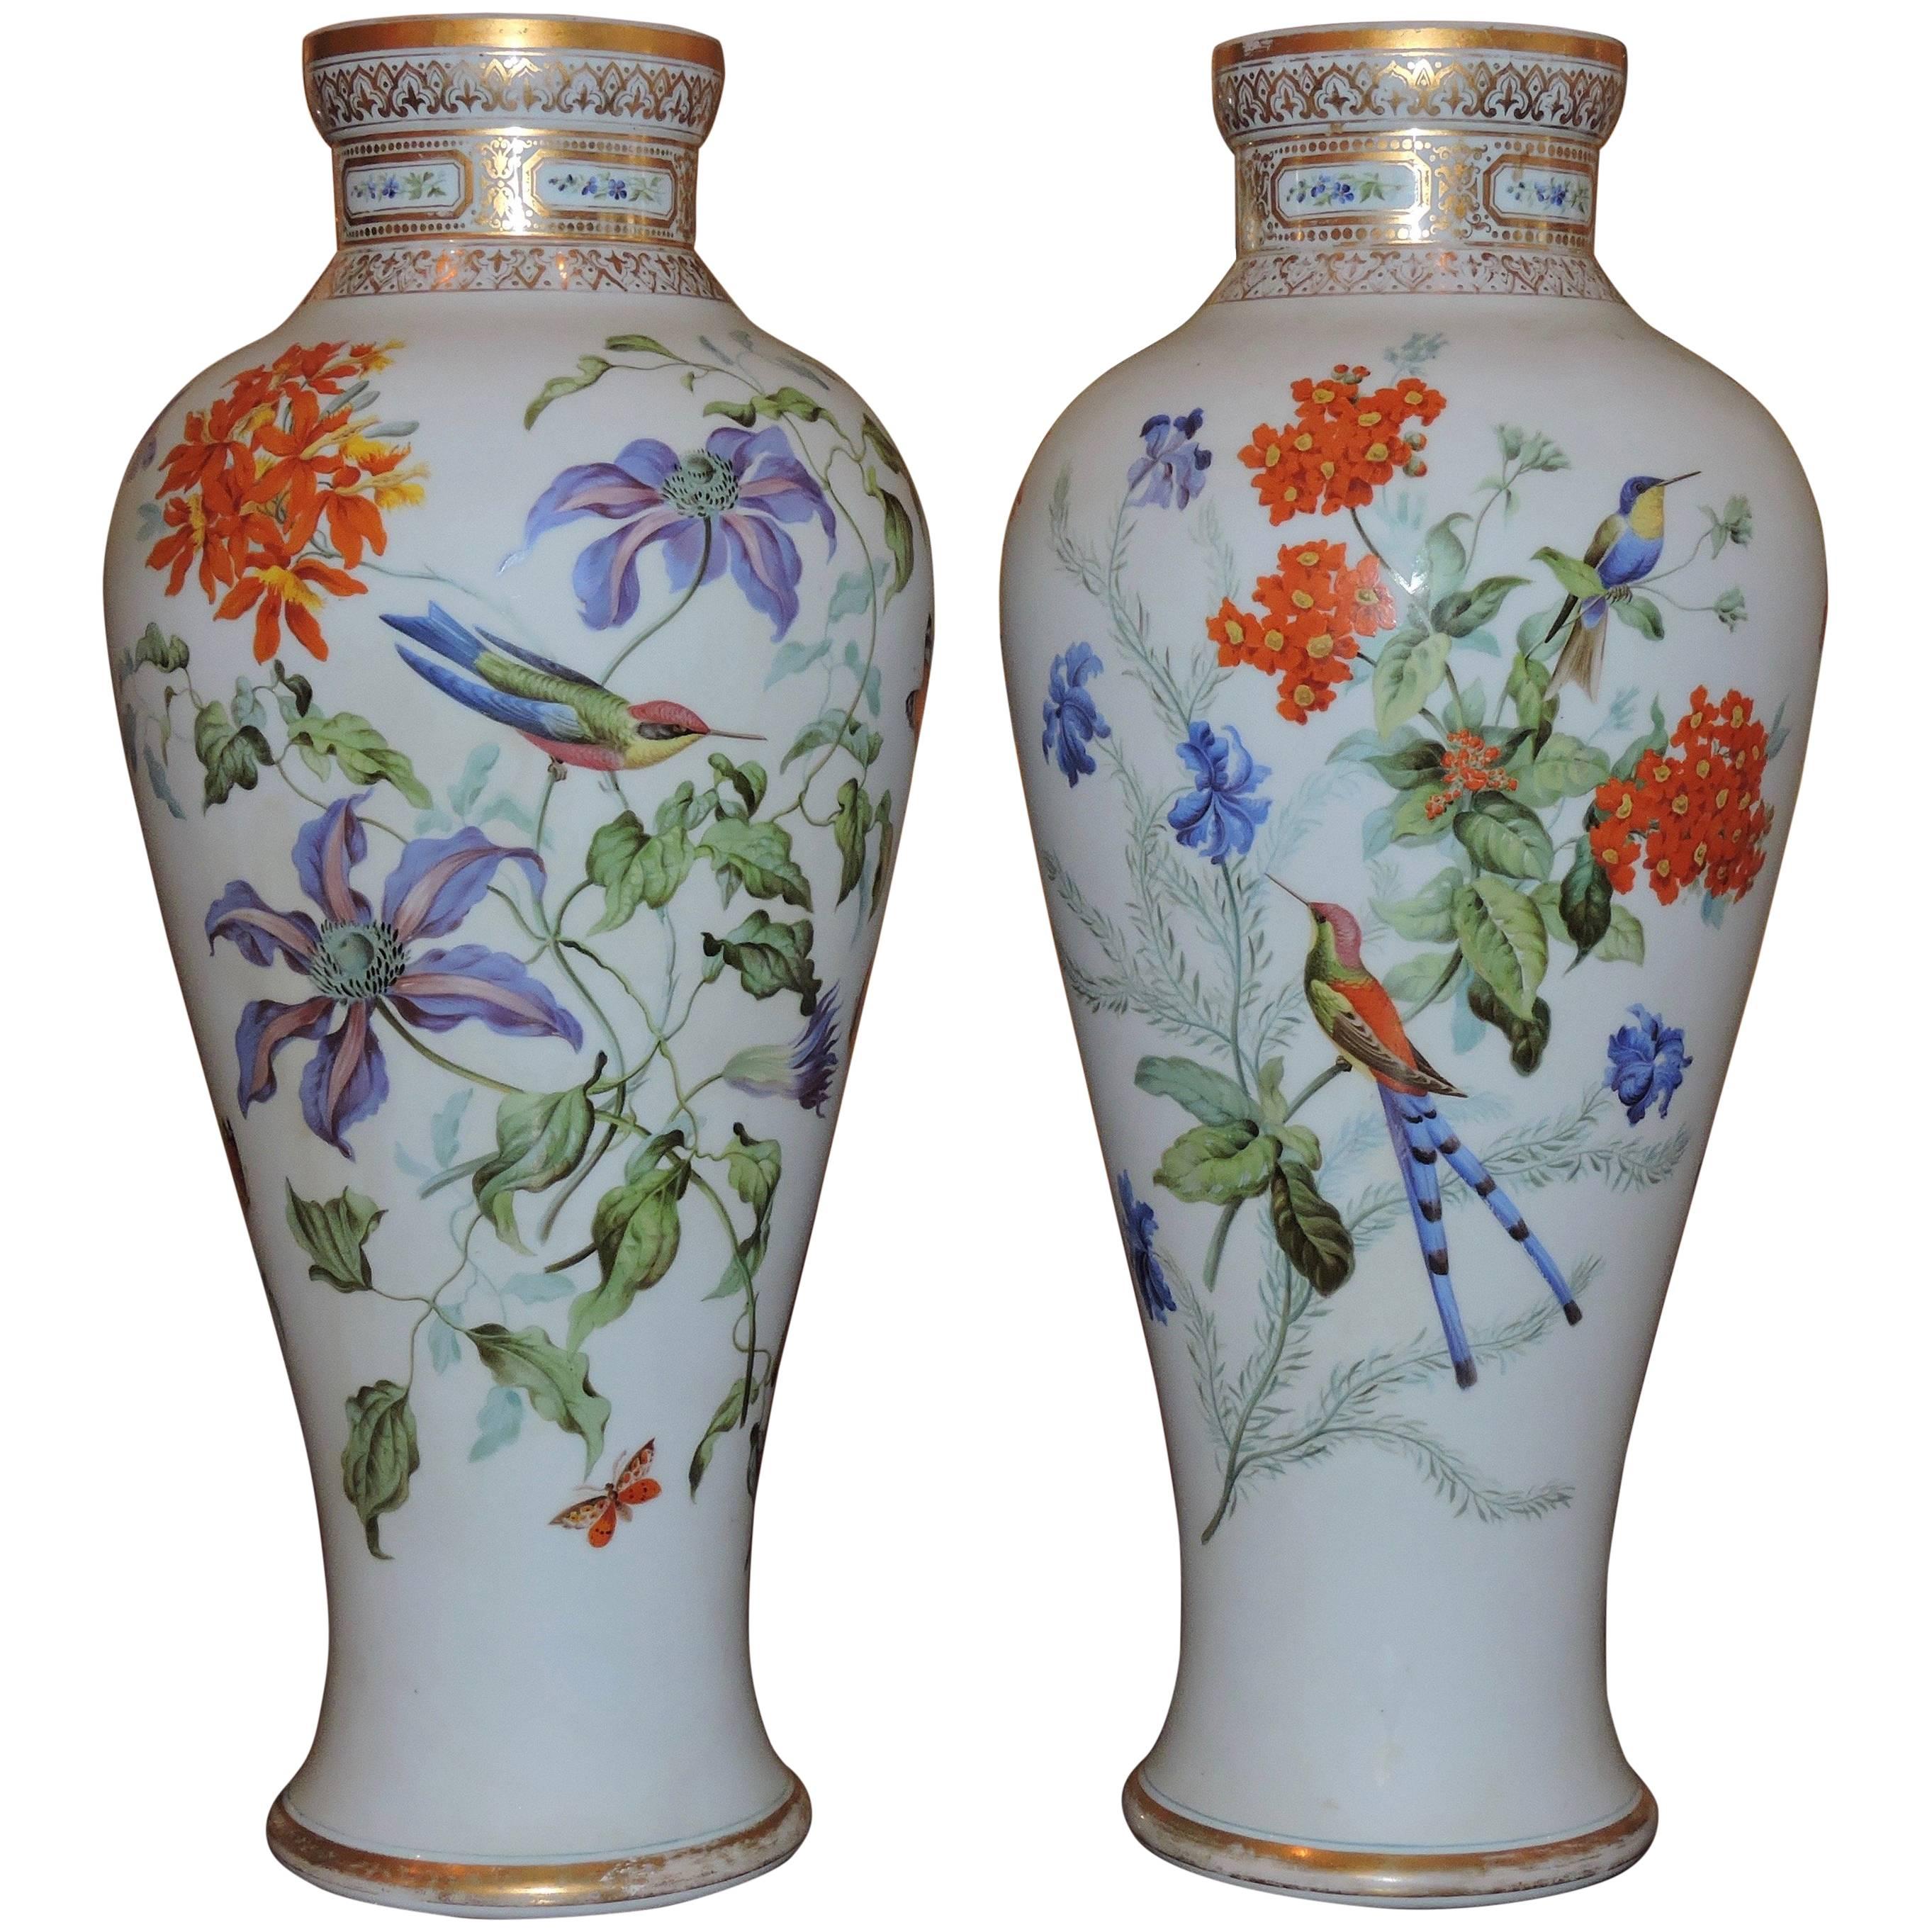 Pair of Baccarat Opaline Glass Vases, circa 1840